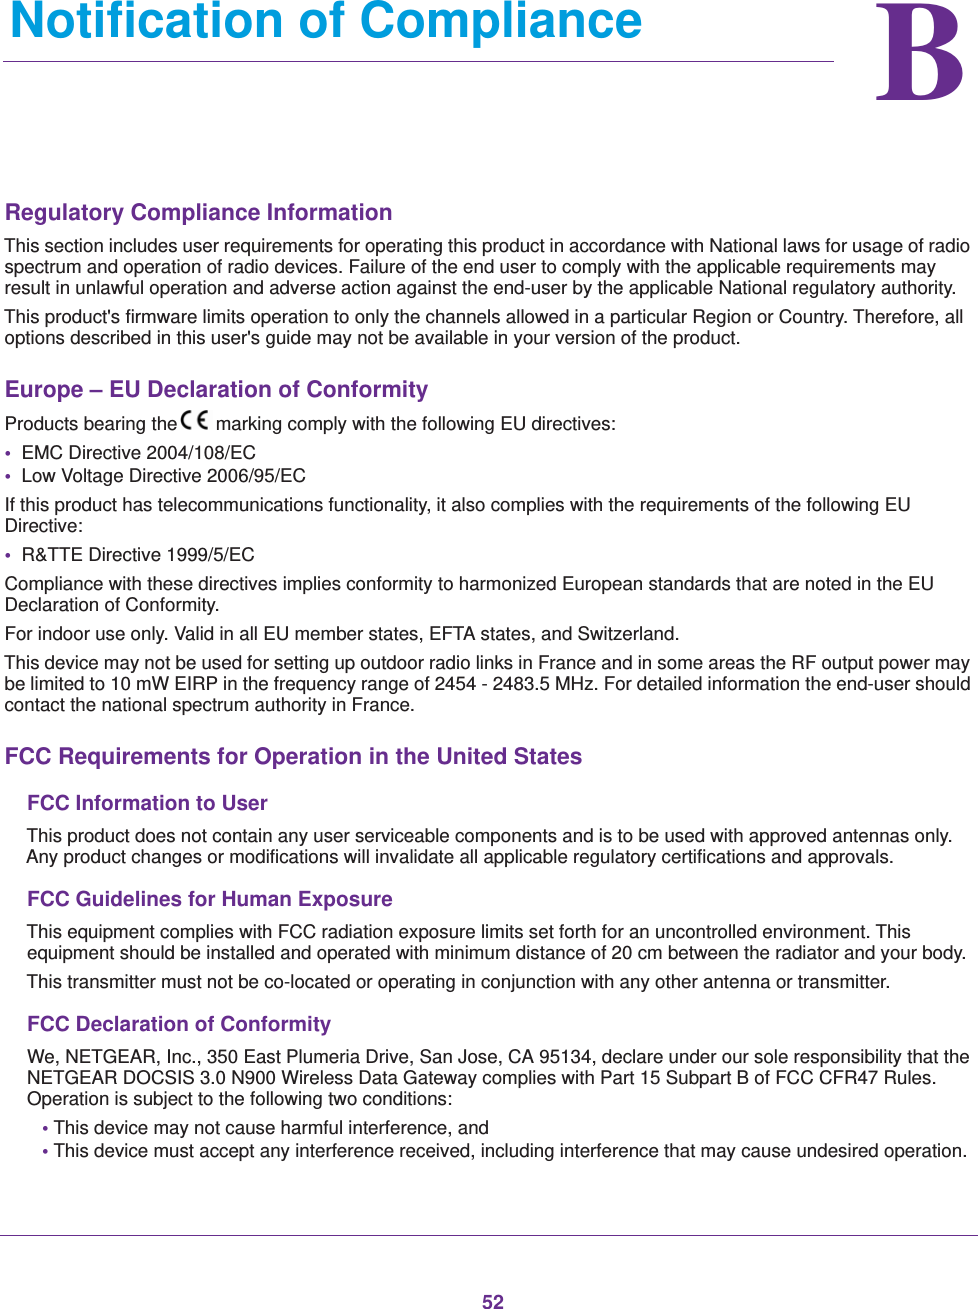 52BB.   Notification of ComplianceRegulatory Compliance InformationThis section includes user requirements for operating this product in accordance with National laws for usage of radio spectrum and operation of radio devices. Failure of the end user to comply with the applicable requirements may result in unlawful operation and adverse action against the end-user by the applicable National regulatory authority.This product&apos;s firmware limits operation to only the channels allowed in a particular Region or Country. Therefore, all options described in this user&apos;s guide may not be available in your version of the product.Europe – EU Declaration of Conformity Products bearing the marking comply with the following EU directives:•  EMC Directive 2004/108/EC•  Low Voltage Directive 2006/95/ECIf this product has telecommunications functionality, it also complies with the requirements of the following EU Directive:•  R&amp;TTE Directive 1999/5/ECCompliance with these directives implies conformity to harmonized European standards that are noted in the EU Declaration of Conformity. For indoor use only. Valid in all EU member states, EFTA states, and Switzerland.This device may not be used for setting up outdoor radio links in France and in some areas the RF output power may be limited to 10 mW EIRP in the frequency range of 2454 - 2483.5 MHz. For detailed information the end-user should contact the national spectrum authority in France.FCC Requirements for Operation in the United States FCC Information to UserThis product does not contain any user serviceable components and is to be used with approved antennas only. Any product changes or modifications will invalidate all applicable regulatory certifications and approvals.FCC Guidelines for Human ExposureThis equipment complies with FCC radiation exposure limits set forth for an uncontrolled environment. This equipment should be installed and operated with minimum distance of 20 cm between the radiator and your body.This transmitter must not be co-located or operating in conjunction with any other antenna or transmitter. FCC Declaration of ConformityWe, NETGEAR, Inc., 350 East Plumeria Drive, San Jose, CA 95134, declare under our sole responsibility that the NETGEAR DOCSIS 3.0 N900 Wireless Data Gateway complies with Part 15 Subpart B of FCC CFR47 Rules. Operation is subject to the following two conditions:• This device may not cause harmful interference, and• This device must accept any interference received, including interference that may cause undesired operation.